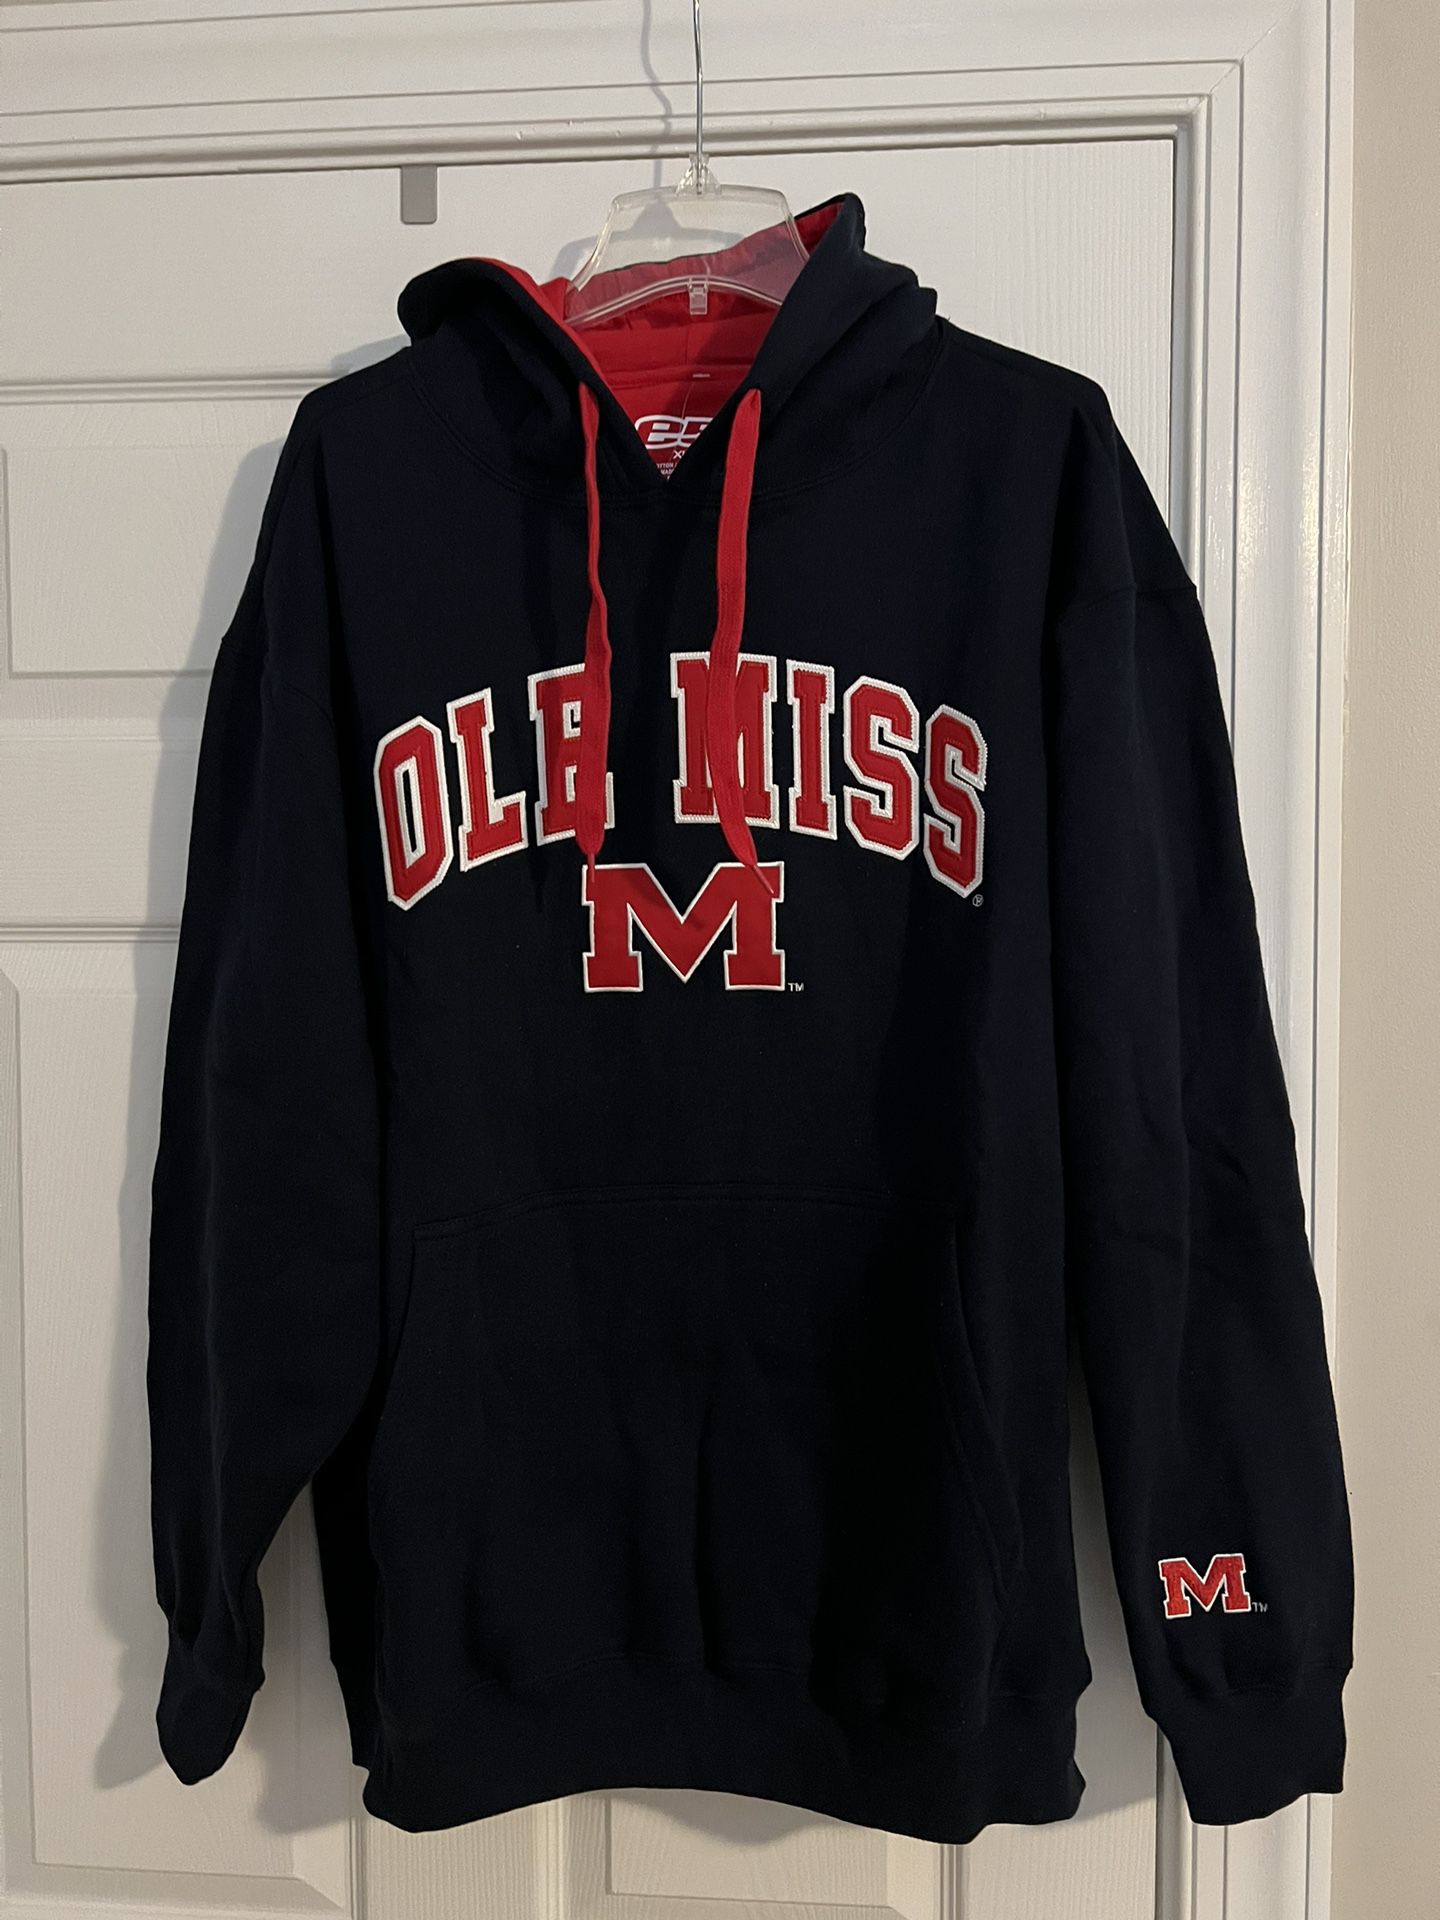 Ole Miss Mississippi Men's XL Navy Red Embroidered Hoodie Sweatshirt NWT Pockets  Navy sweatshirt/hoodie. Red and white accents. Embroidered. Kangaroo